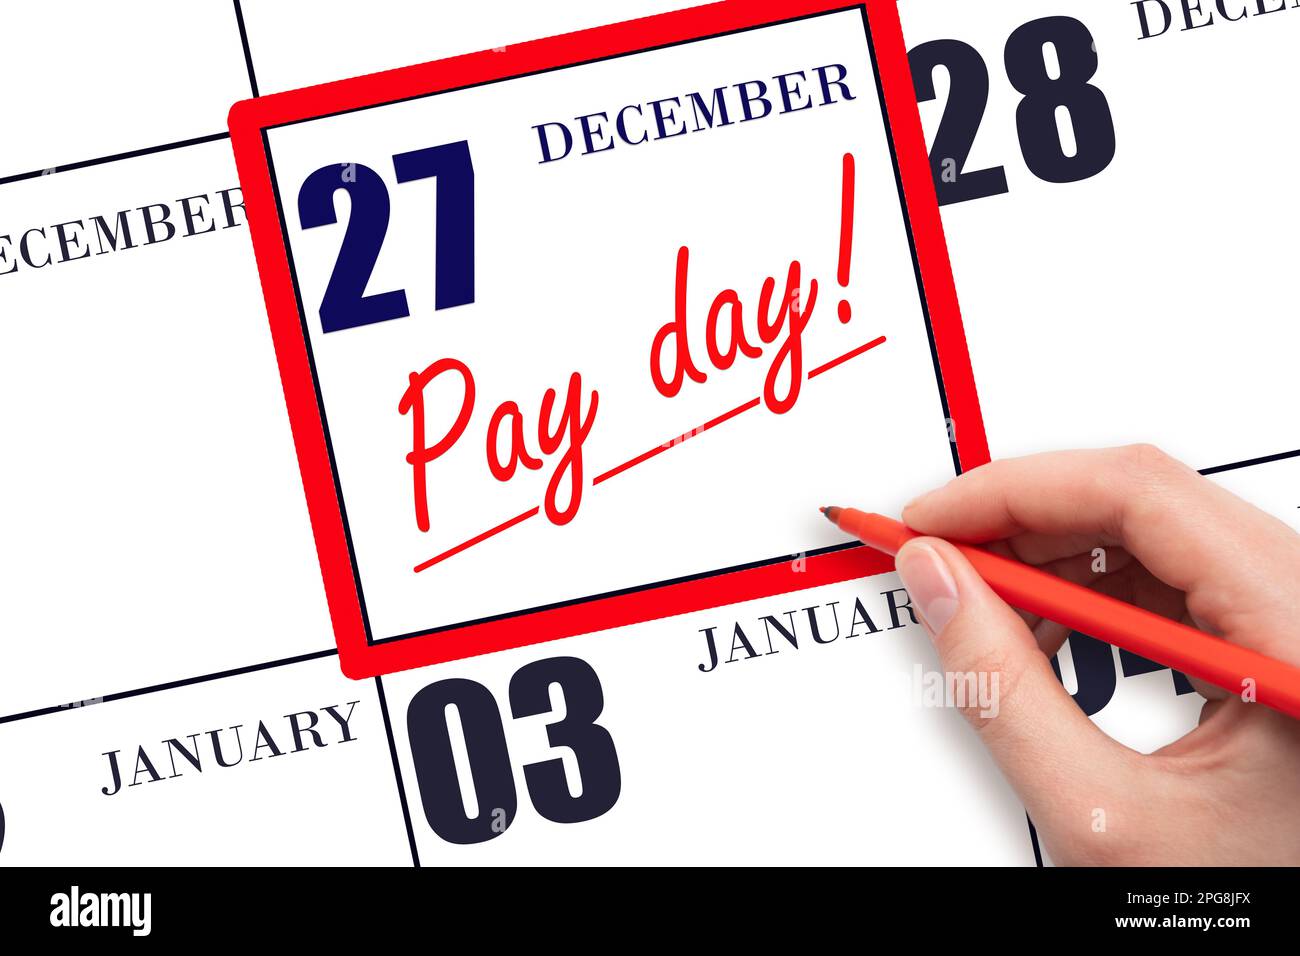 27th day of December. Hand writing text PAY DATE on calendar date December 27 and underline it. Payment due date. Reminder concept of payment. Winter Stock Photo